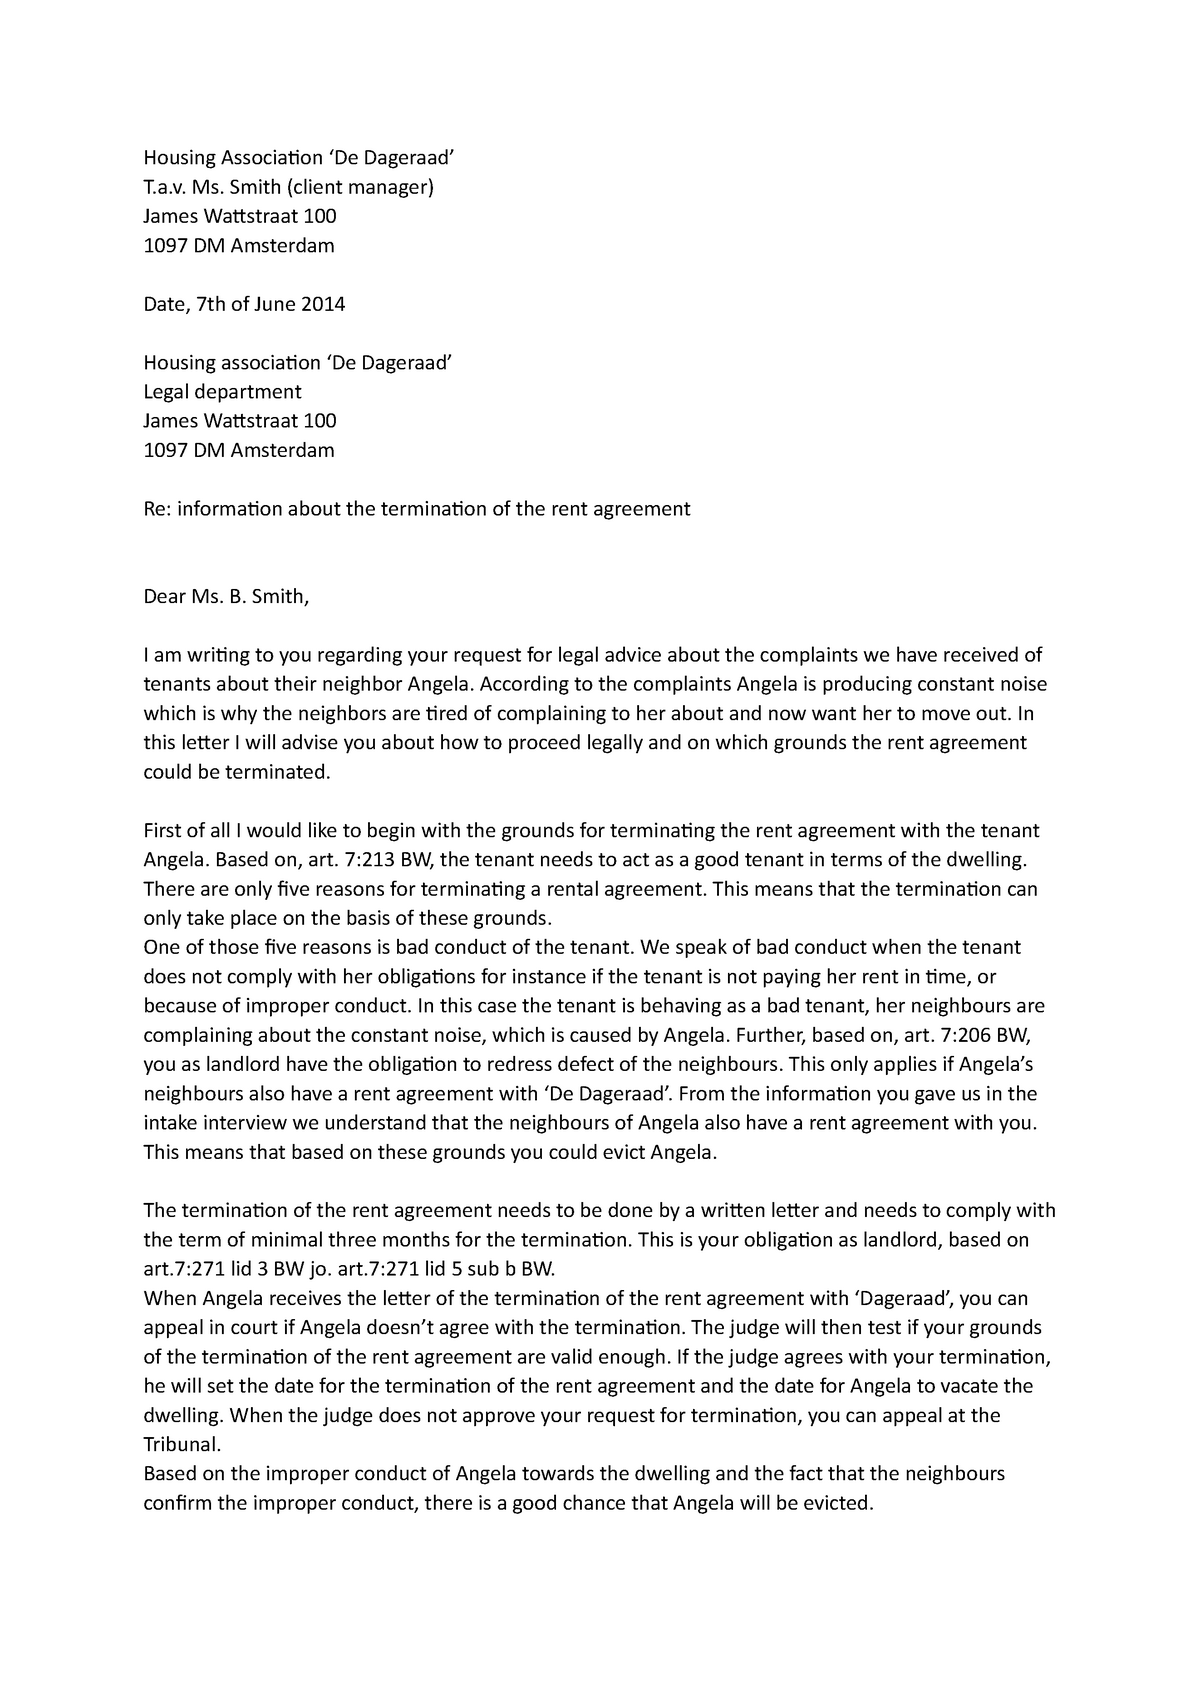 Letter of advice - Housing Association ‘De Dageraad’ T.a. Ms. Smith ...